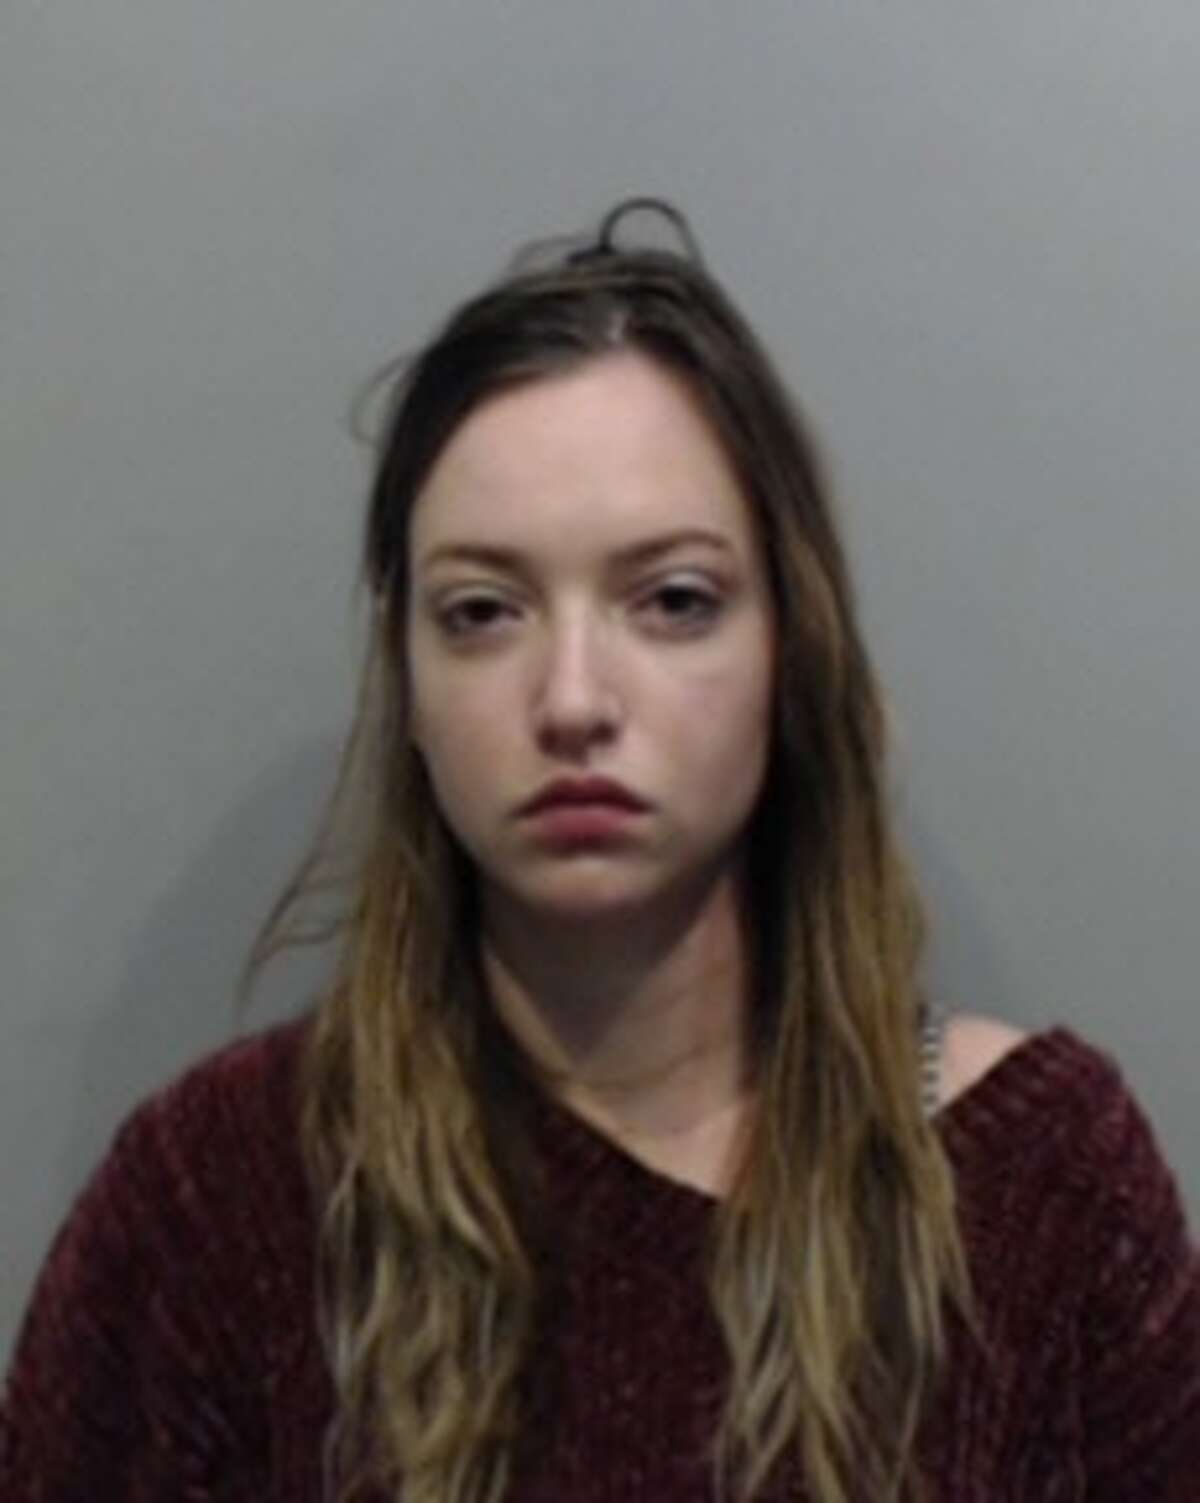 Breanna Kilgore, 23, faces a charge of driving while intoxicated.